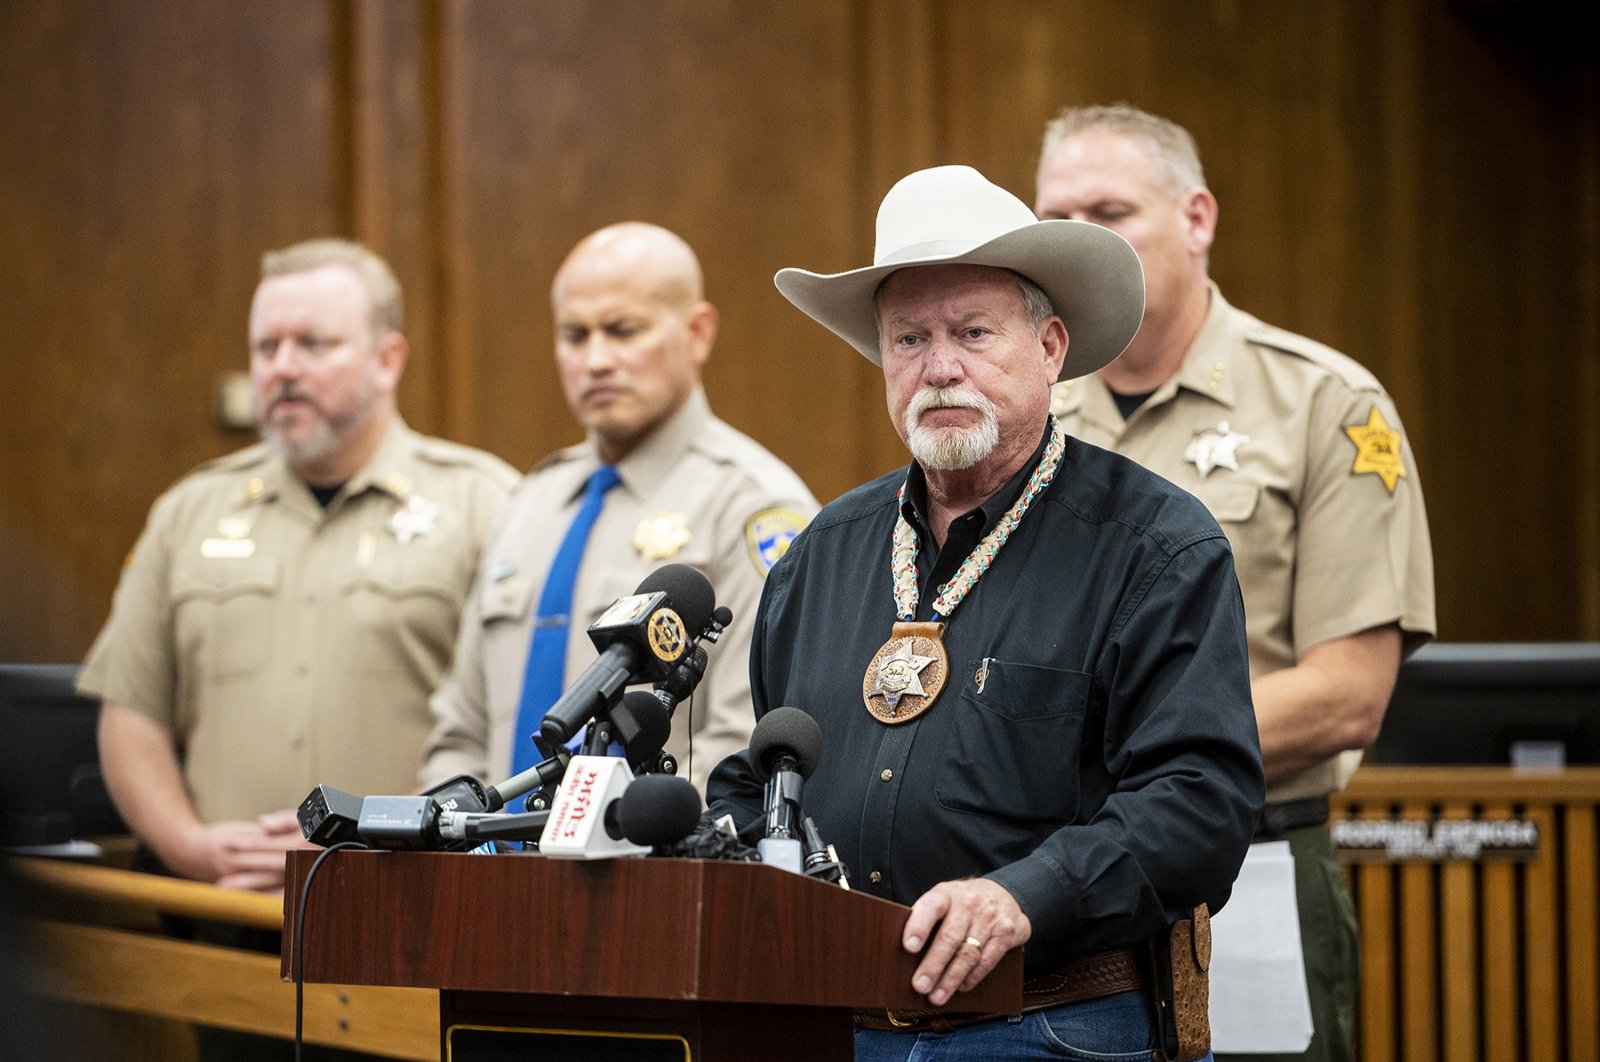 Merced County Sheriff Vern Warnke, speaks at a news conference about the kidnapping of 8-month-old Aroohi Dheri, her mother Jasleen Kaur, her father Jasdeep Singh, and her uncle Amandeep Singh. Merced, California, Oct. 5, 2022. (AP Photo)